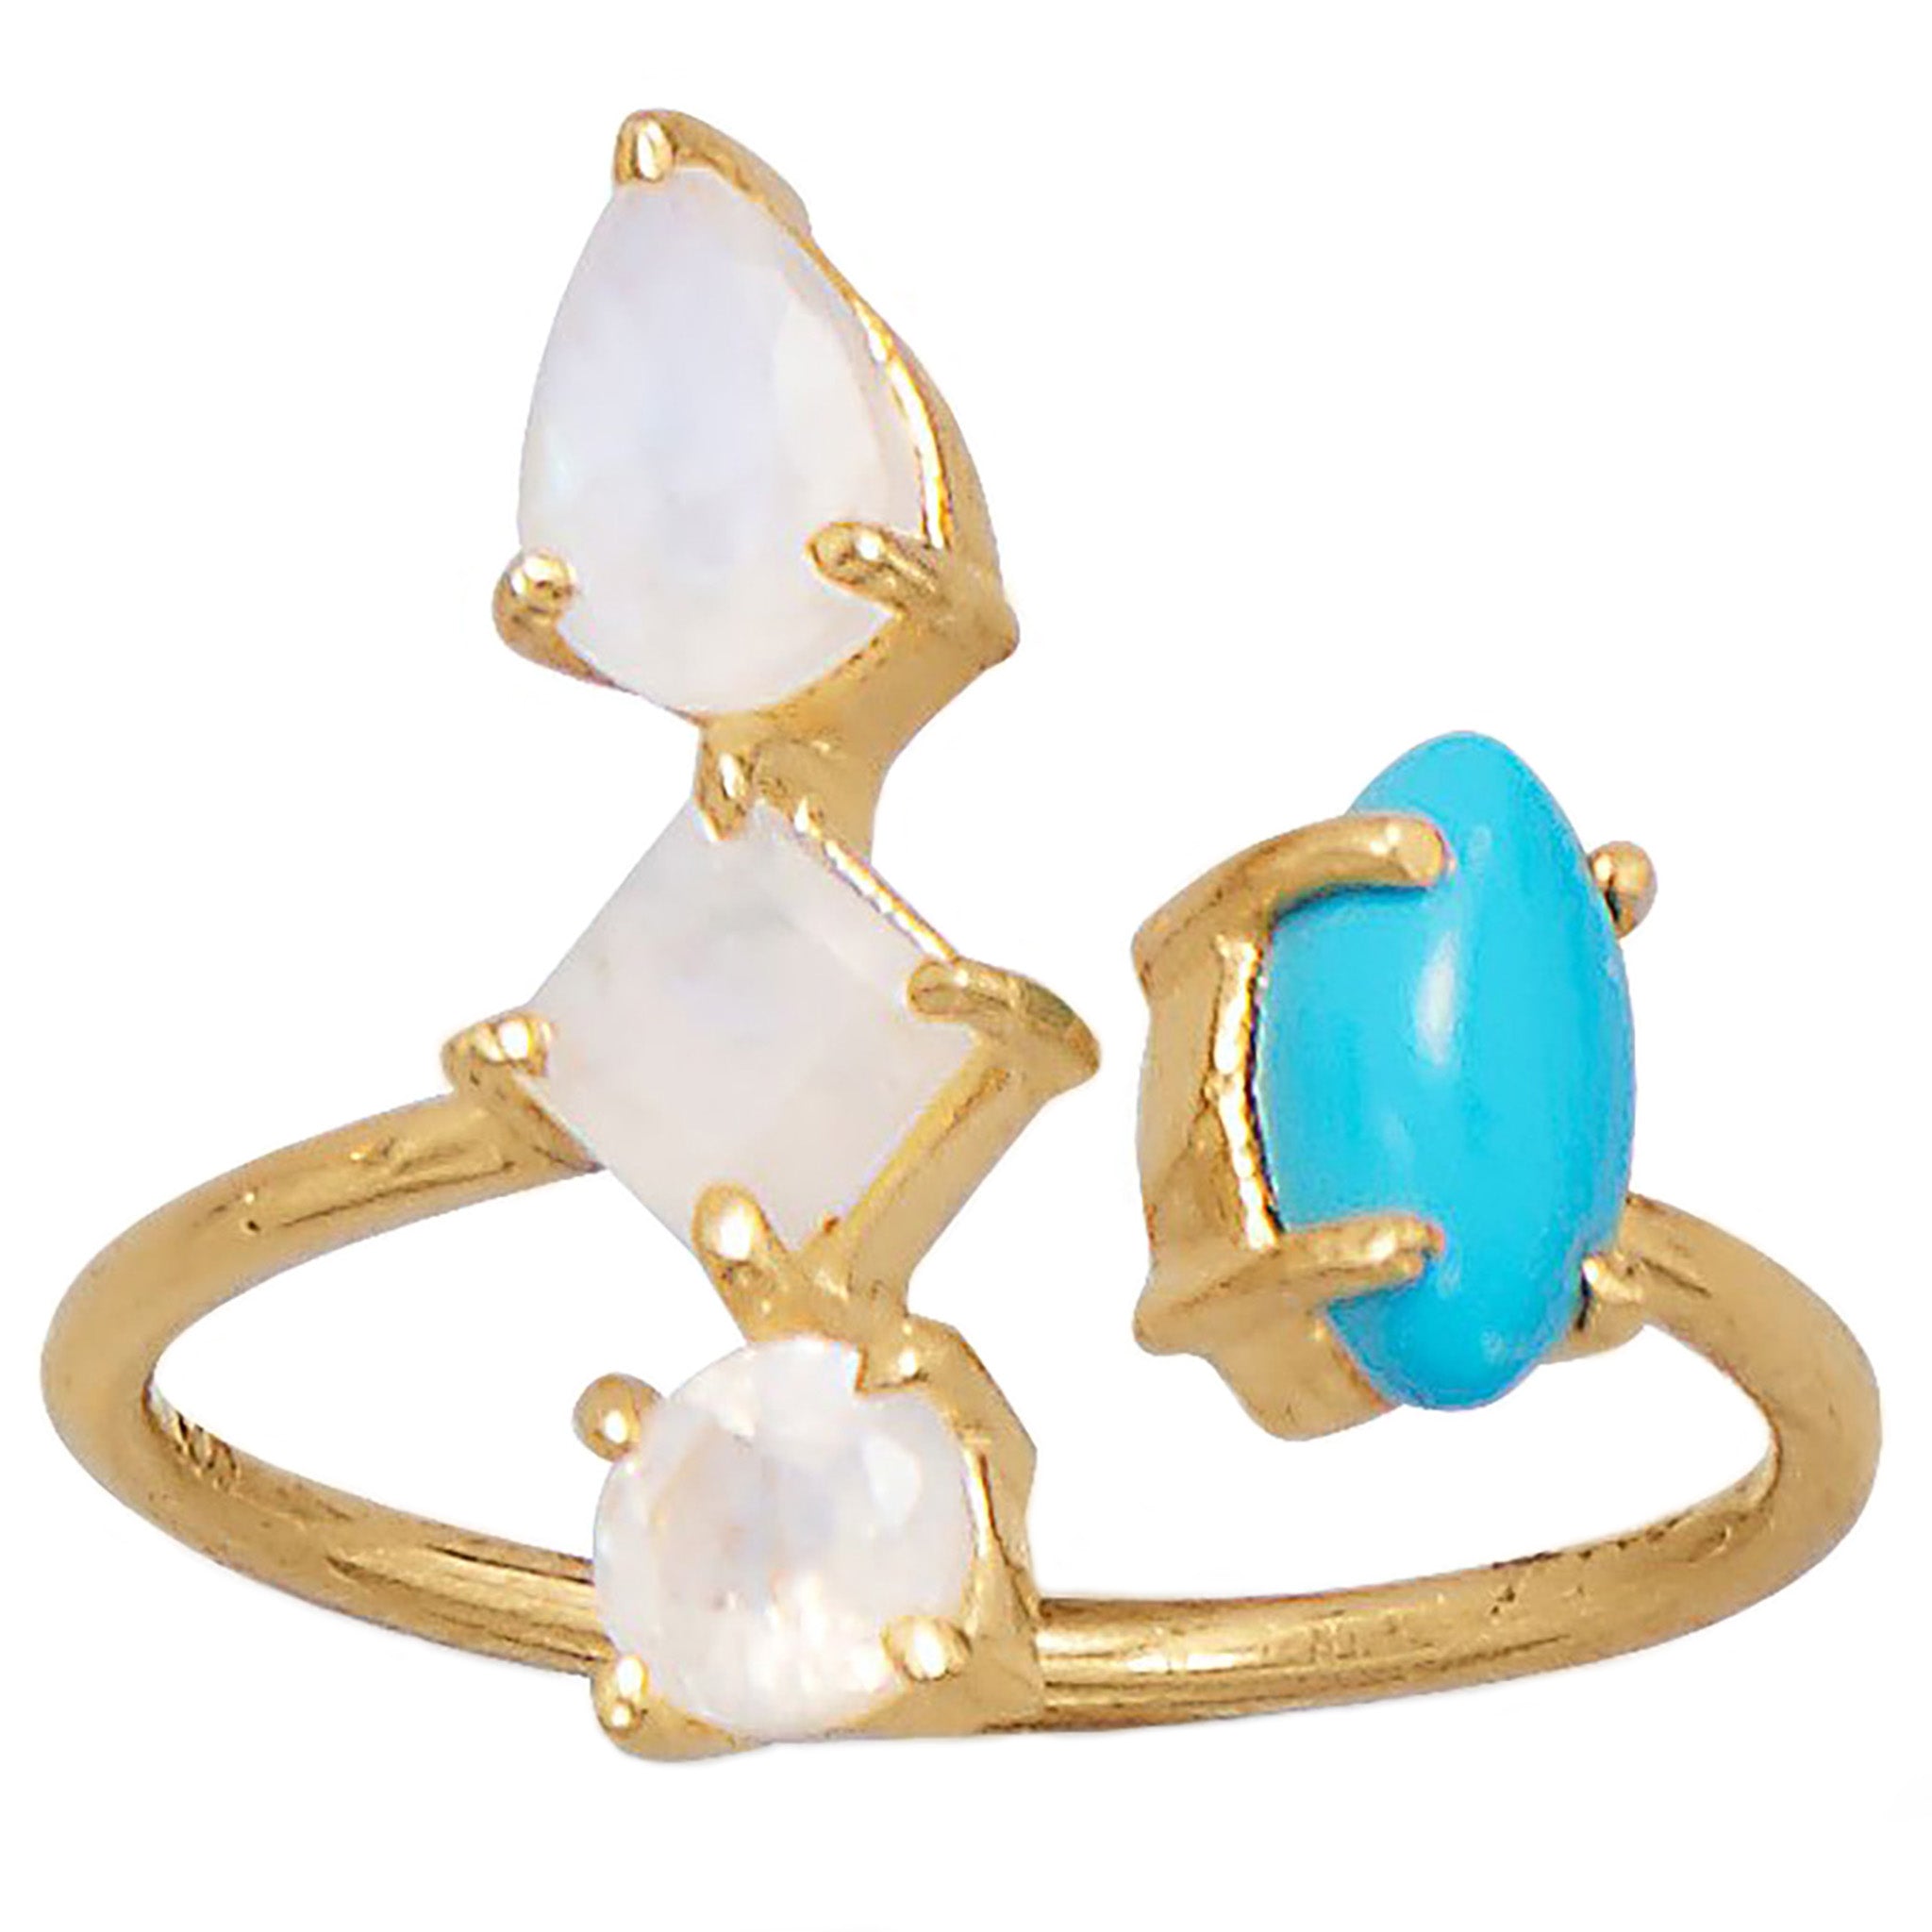 Rainbow Moonstone and Turquoise Wrap Ring